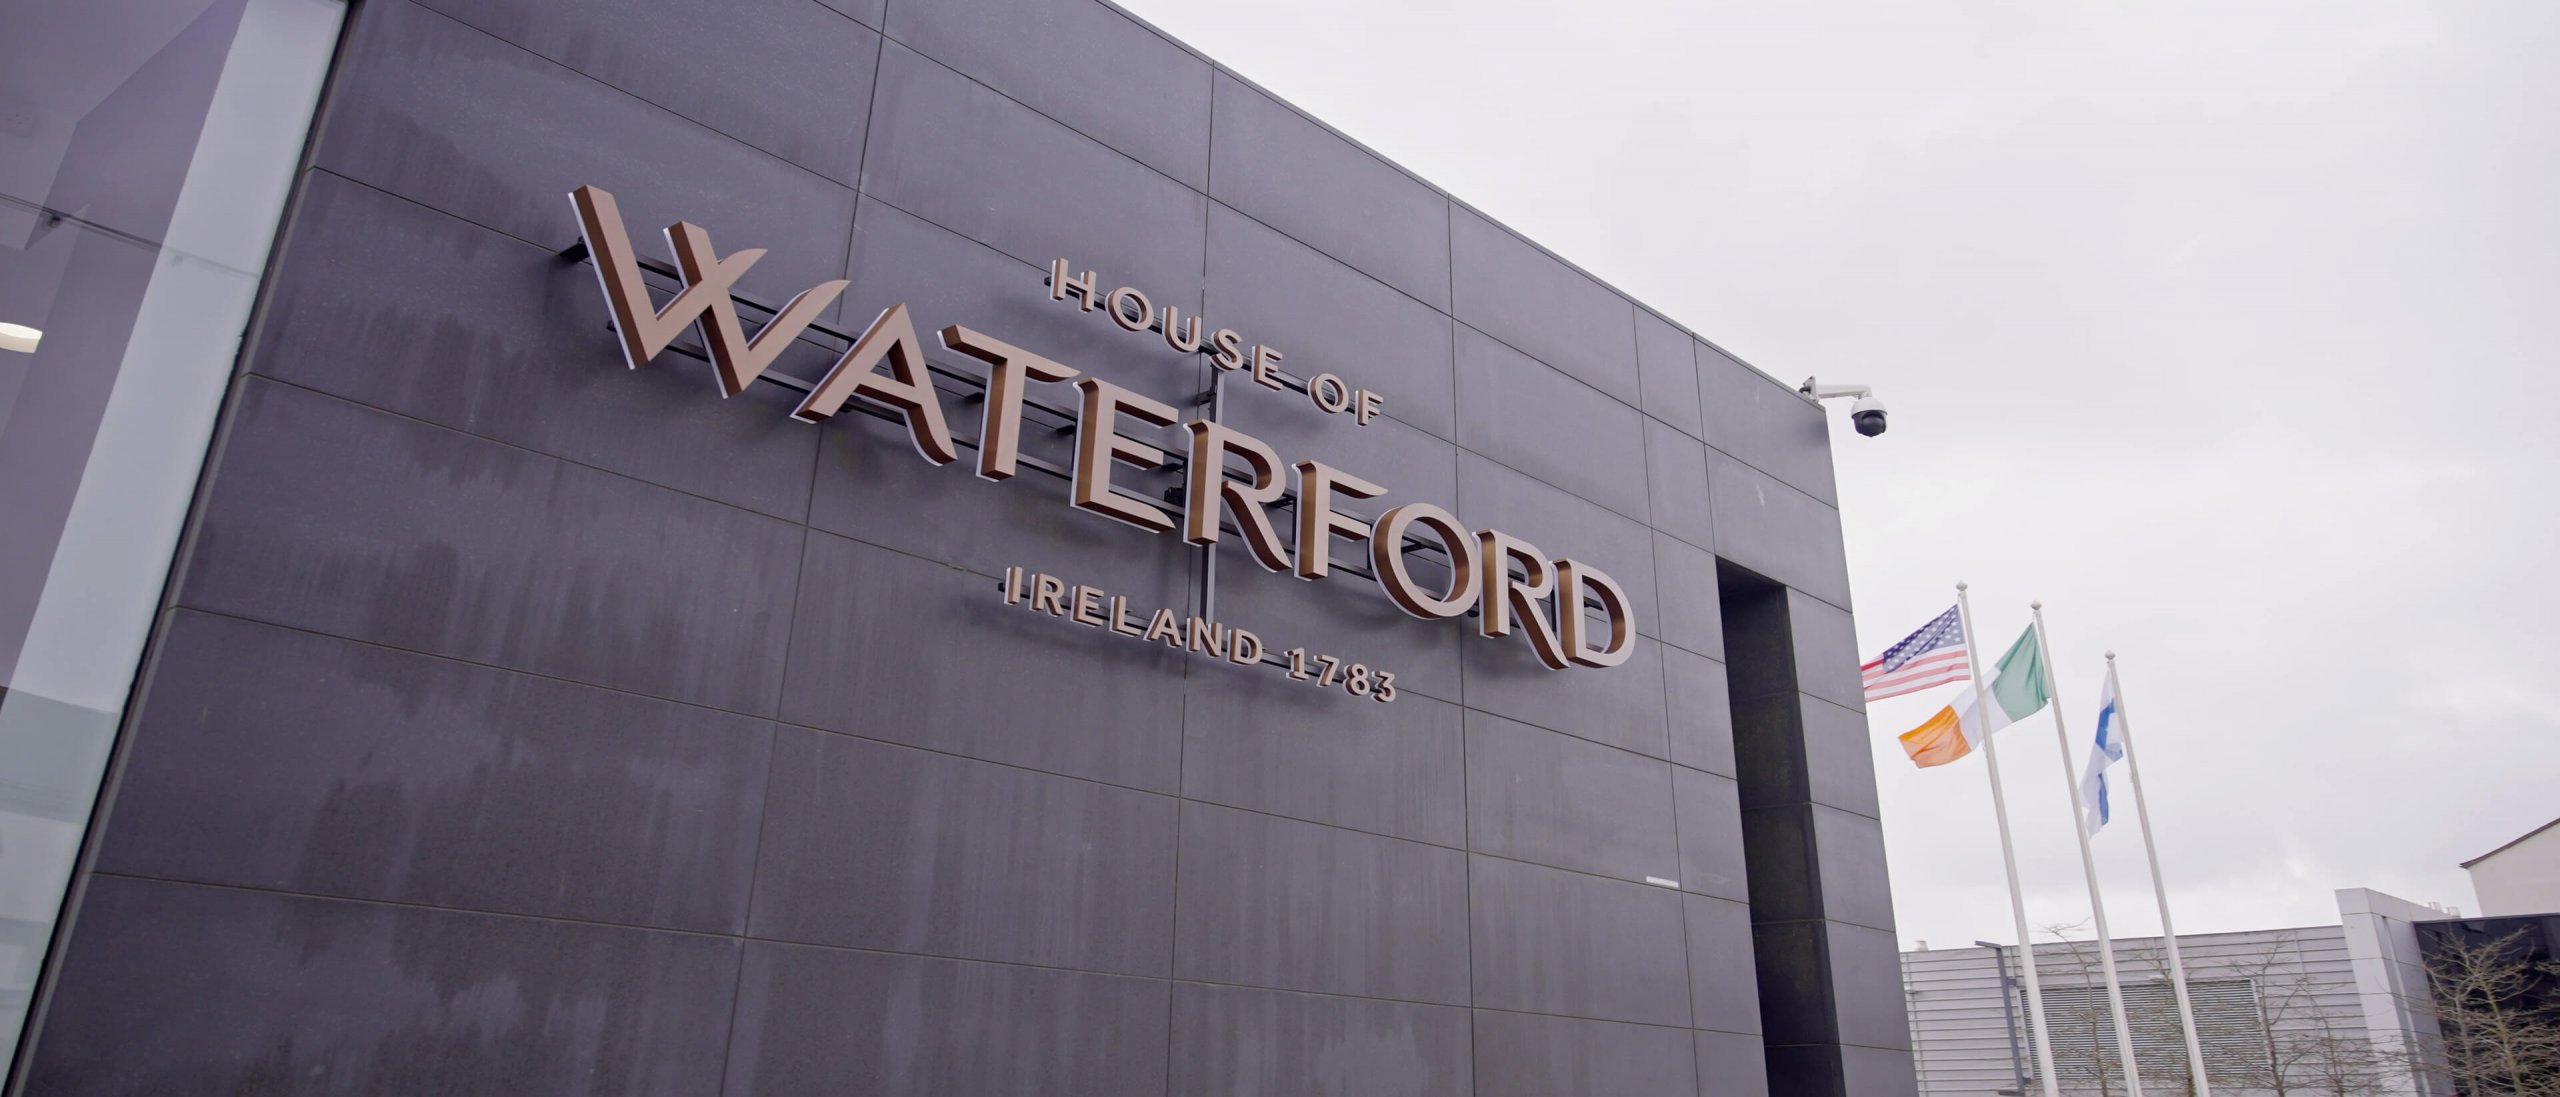 The front sign on the house of waterford building